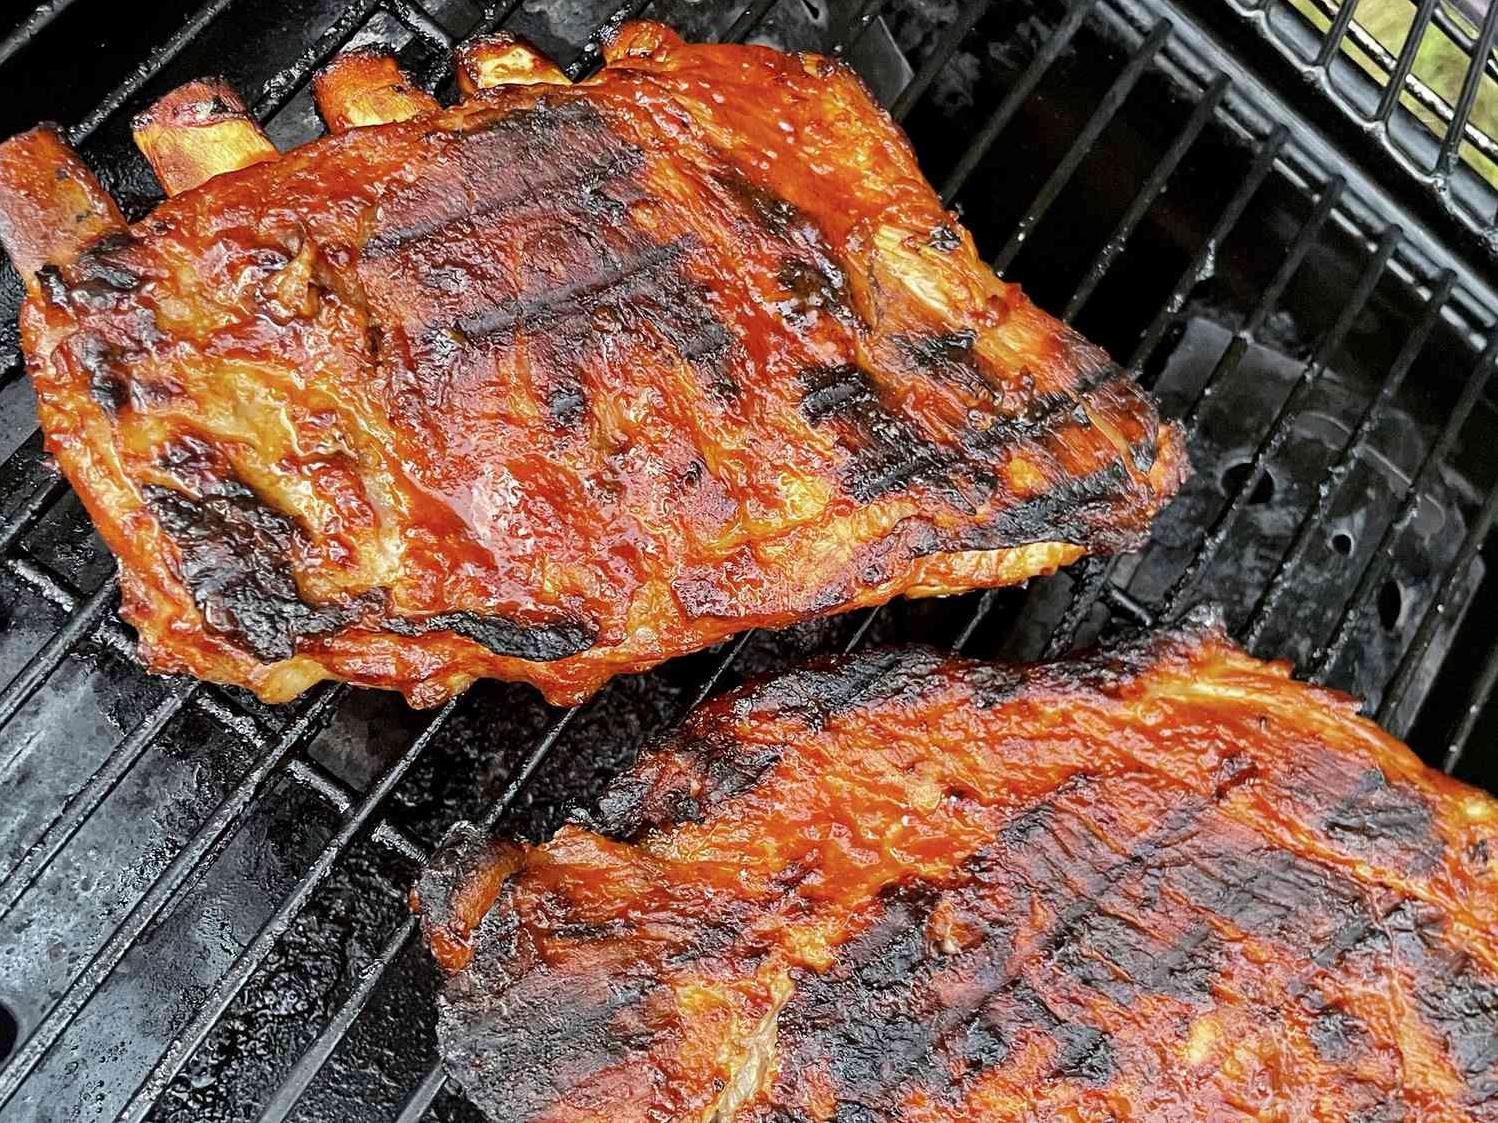  No barbecue is complete without a plate (or two) of these mouthwatering ribs.